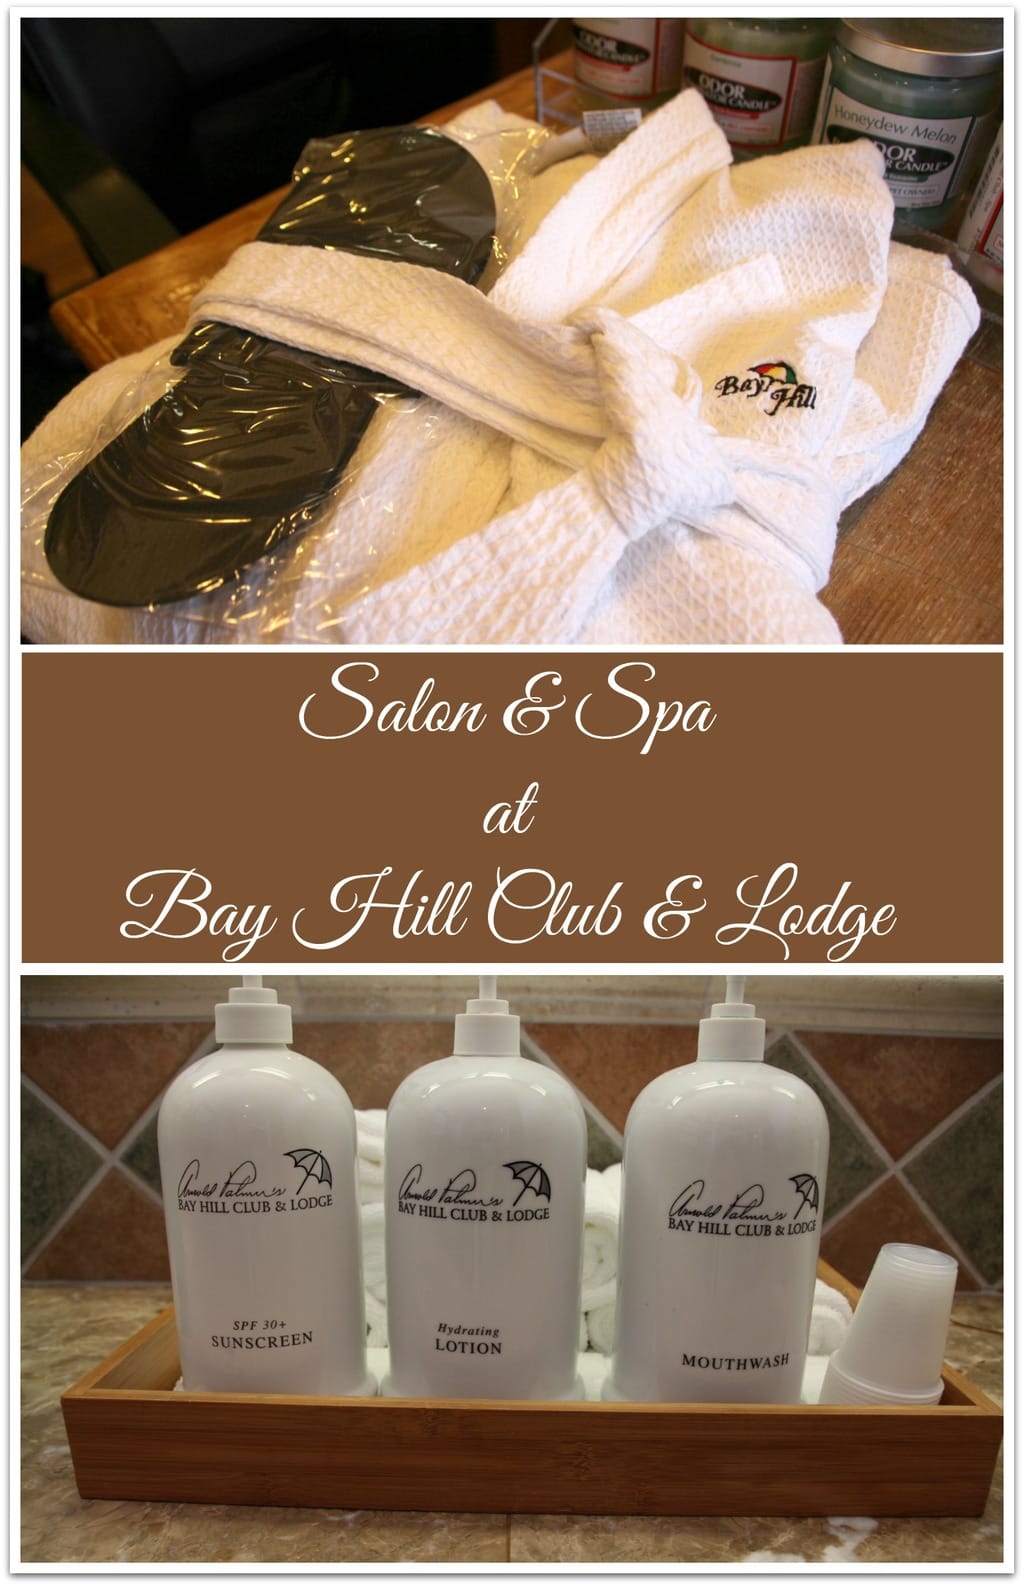 If you love being pampered, The Salon and Spa at Bay Hill Club and Lodge will not disappoint. 